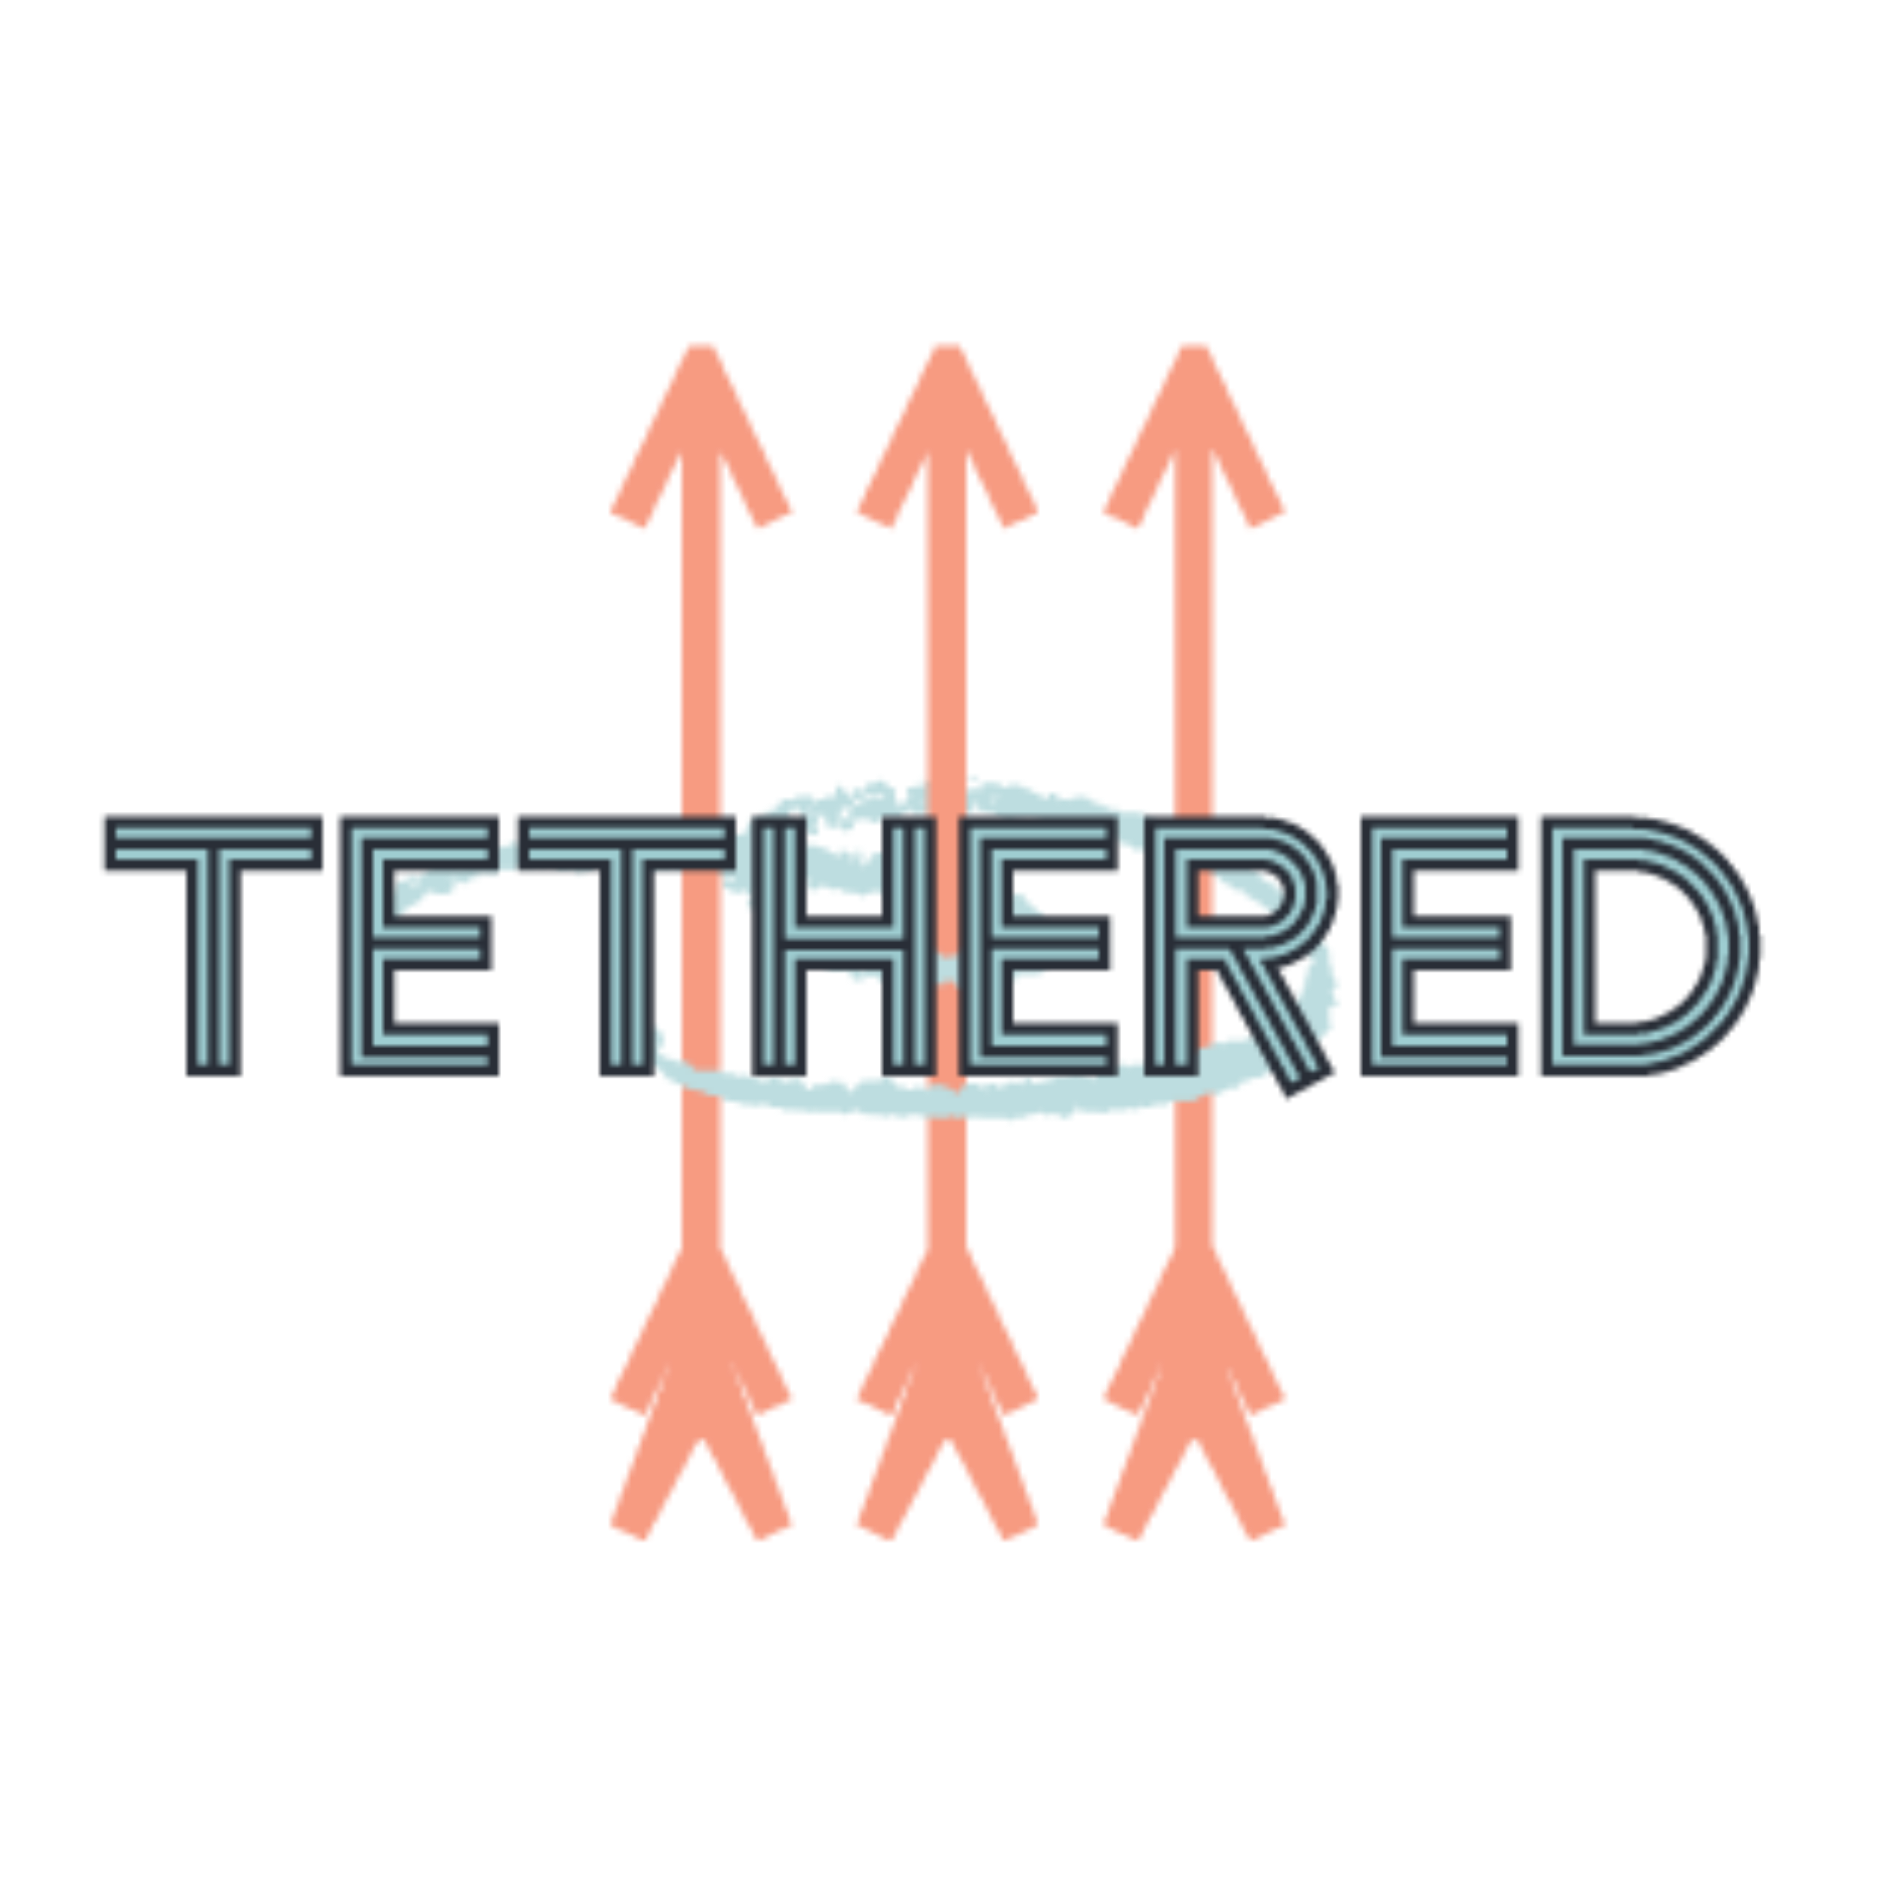 Tethered - A Father-Son Weekend